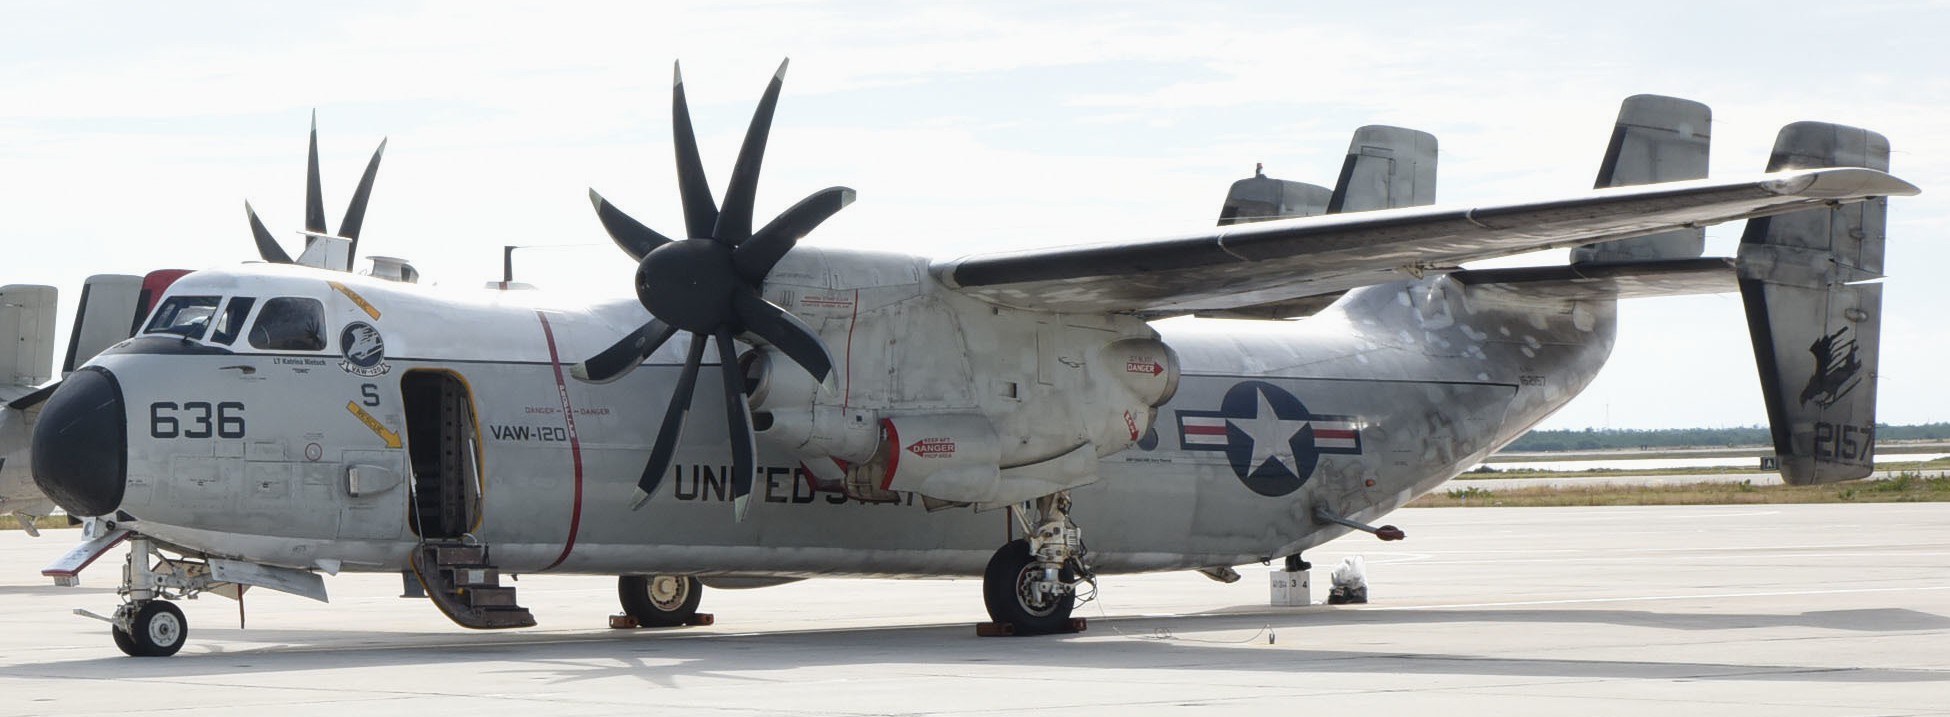 vaw-120 greyhawks carrier airborne early warning squadron c-2a greyhound replacement nas key west florida 65